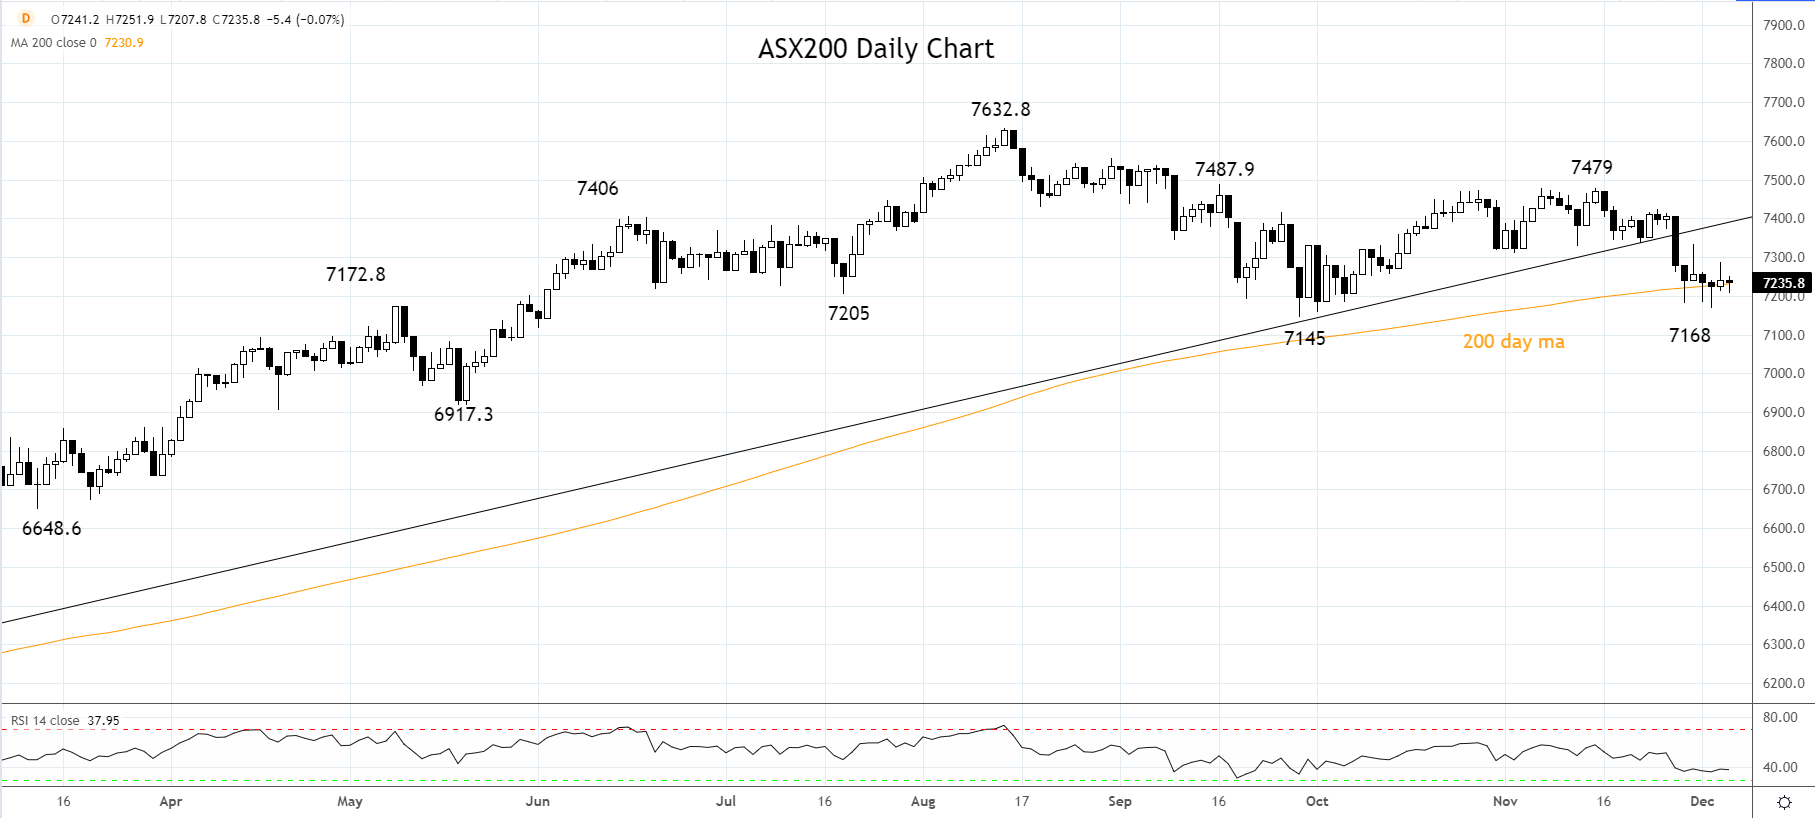 ASX200 Daily Chart 6th of Dec